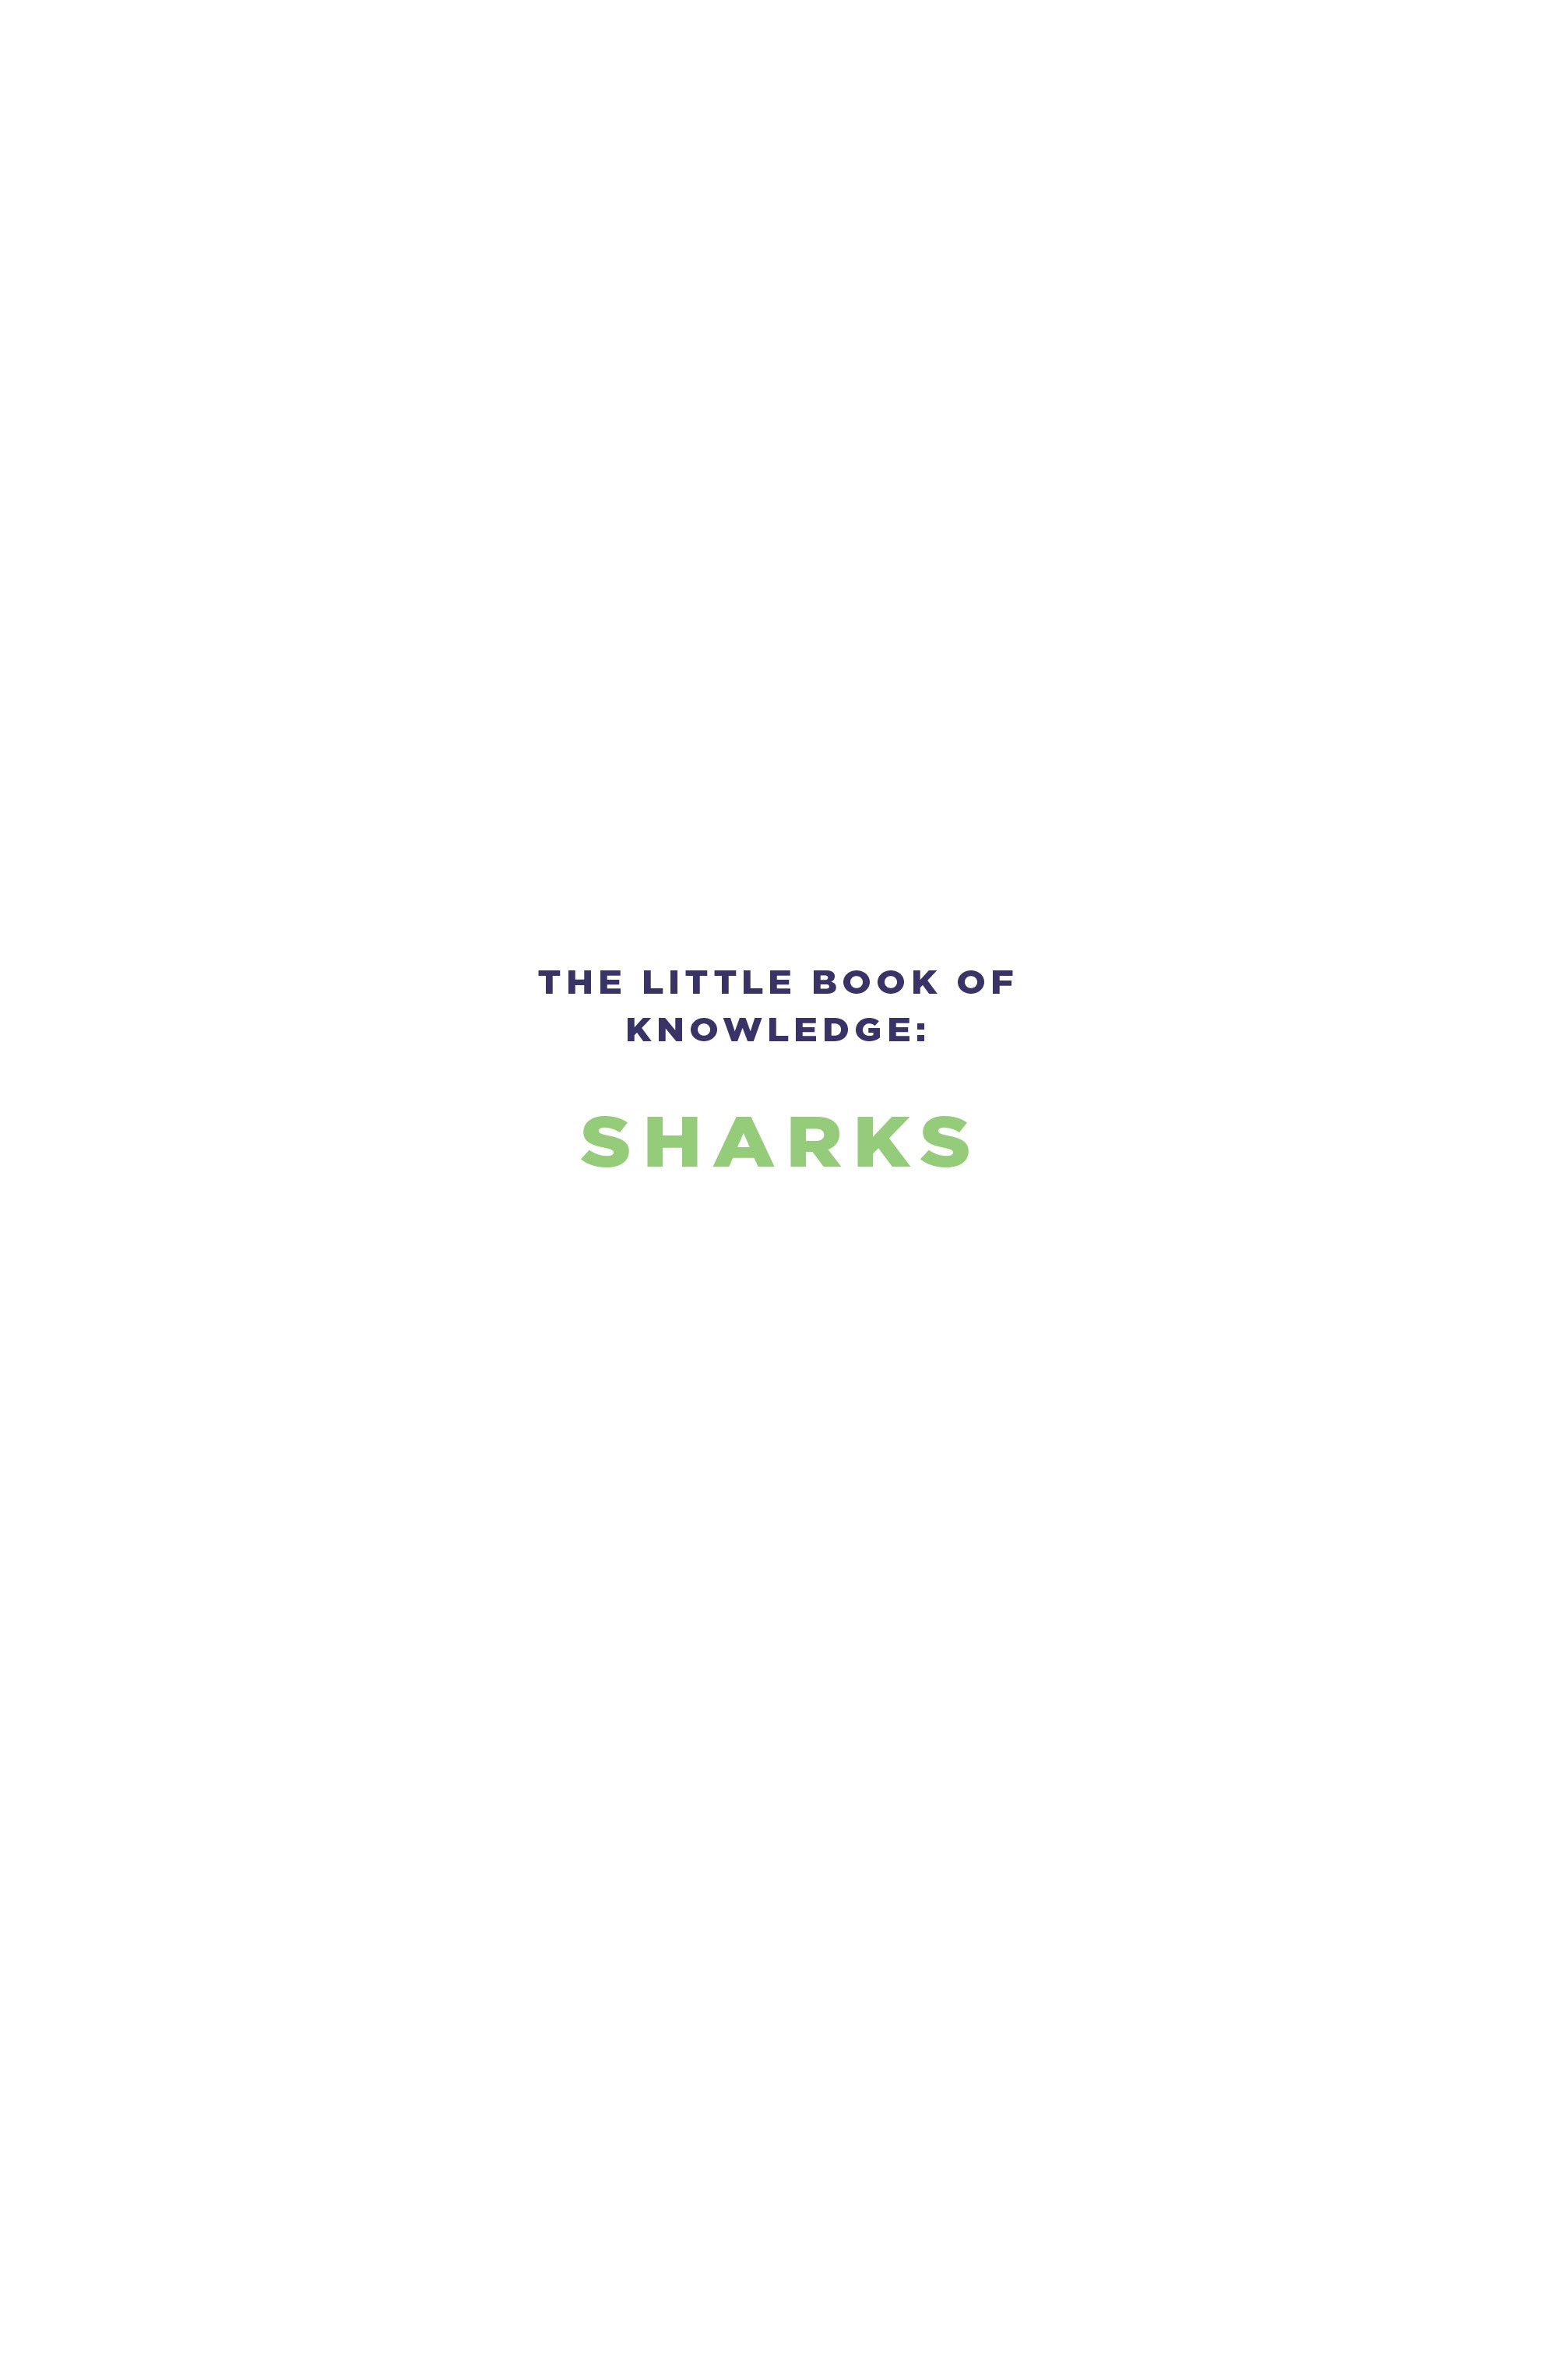 Read online Little Book of Knowledge: Sharks comic -  Issue # TPB - 3